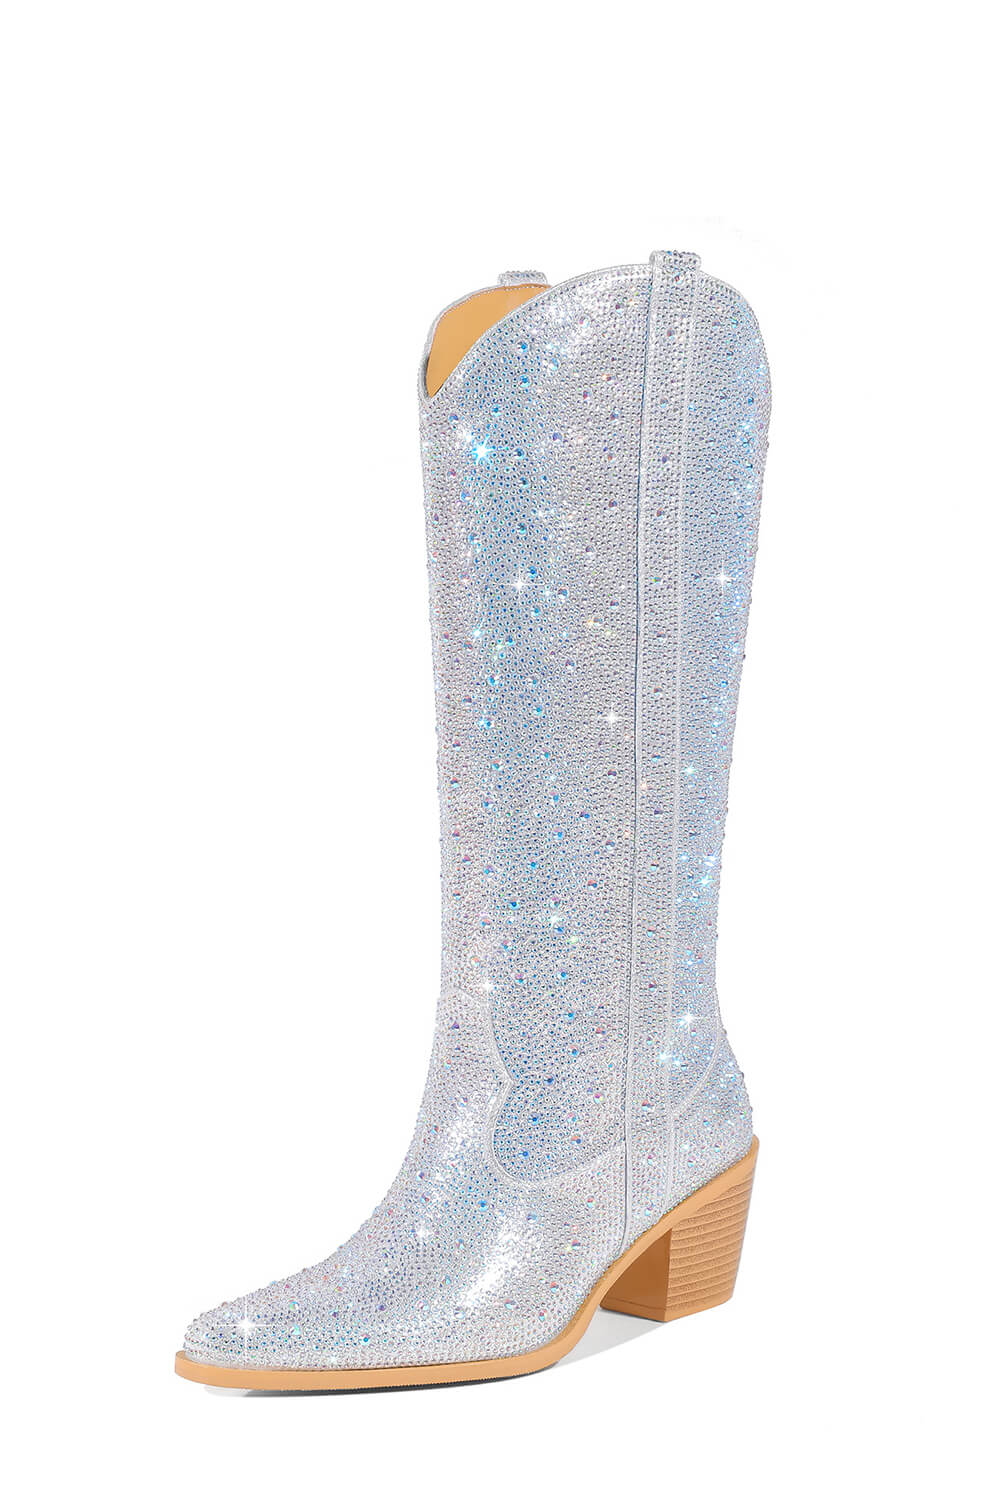 Rhinestones Embellished Western Cowboy Mid-Calf Pointed Toe Block Heeled Boots - Silver